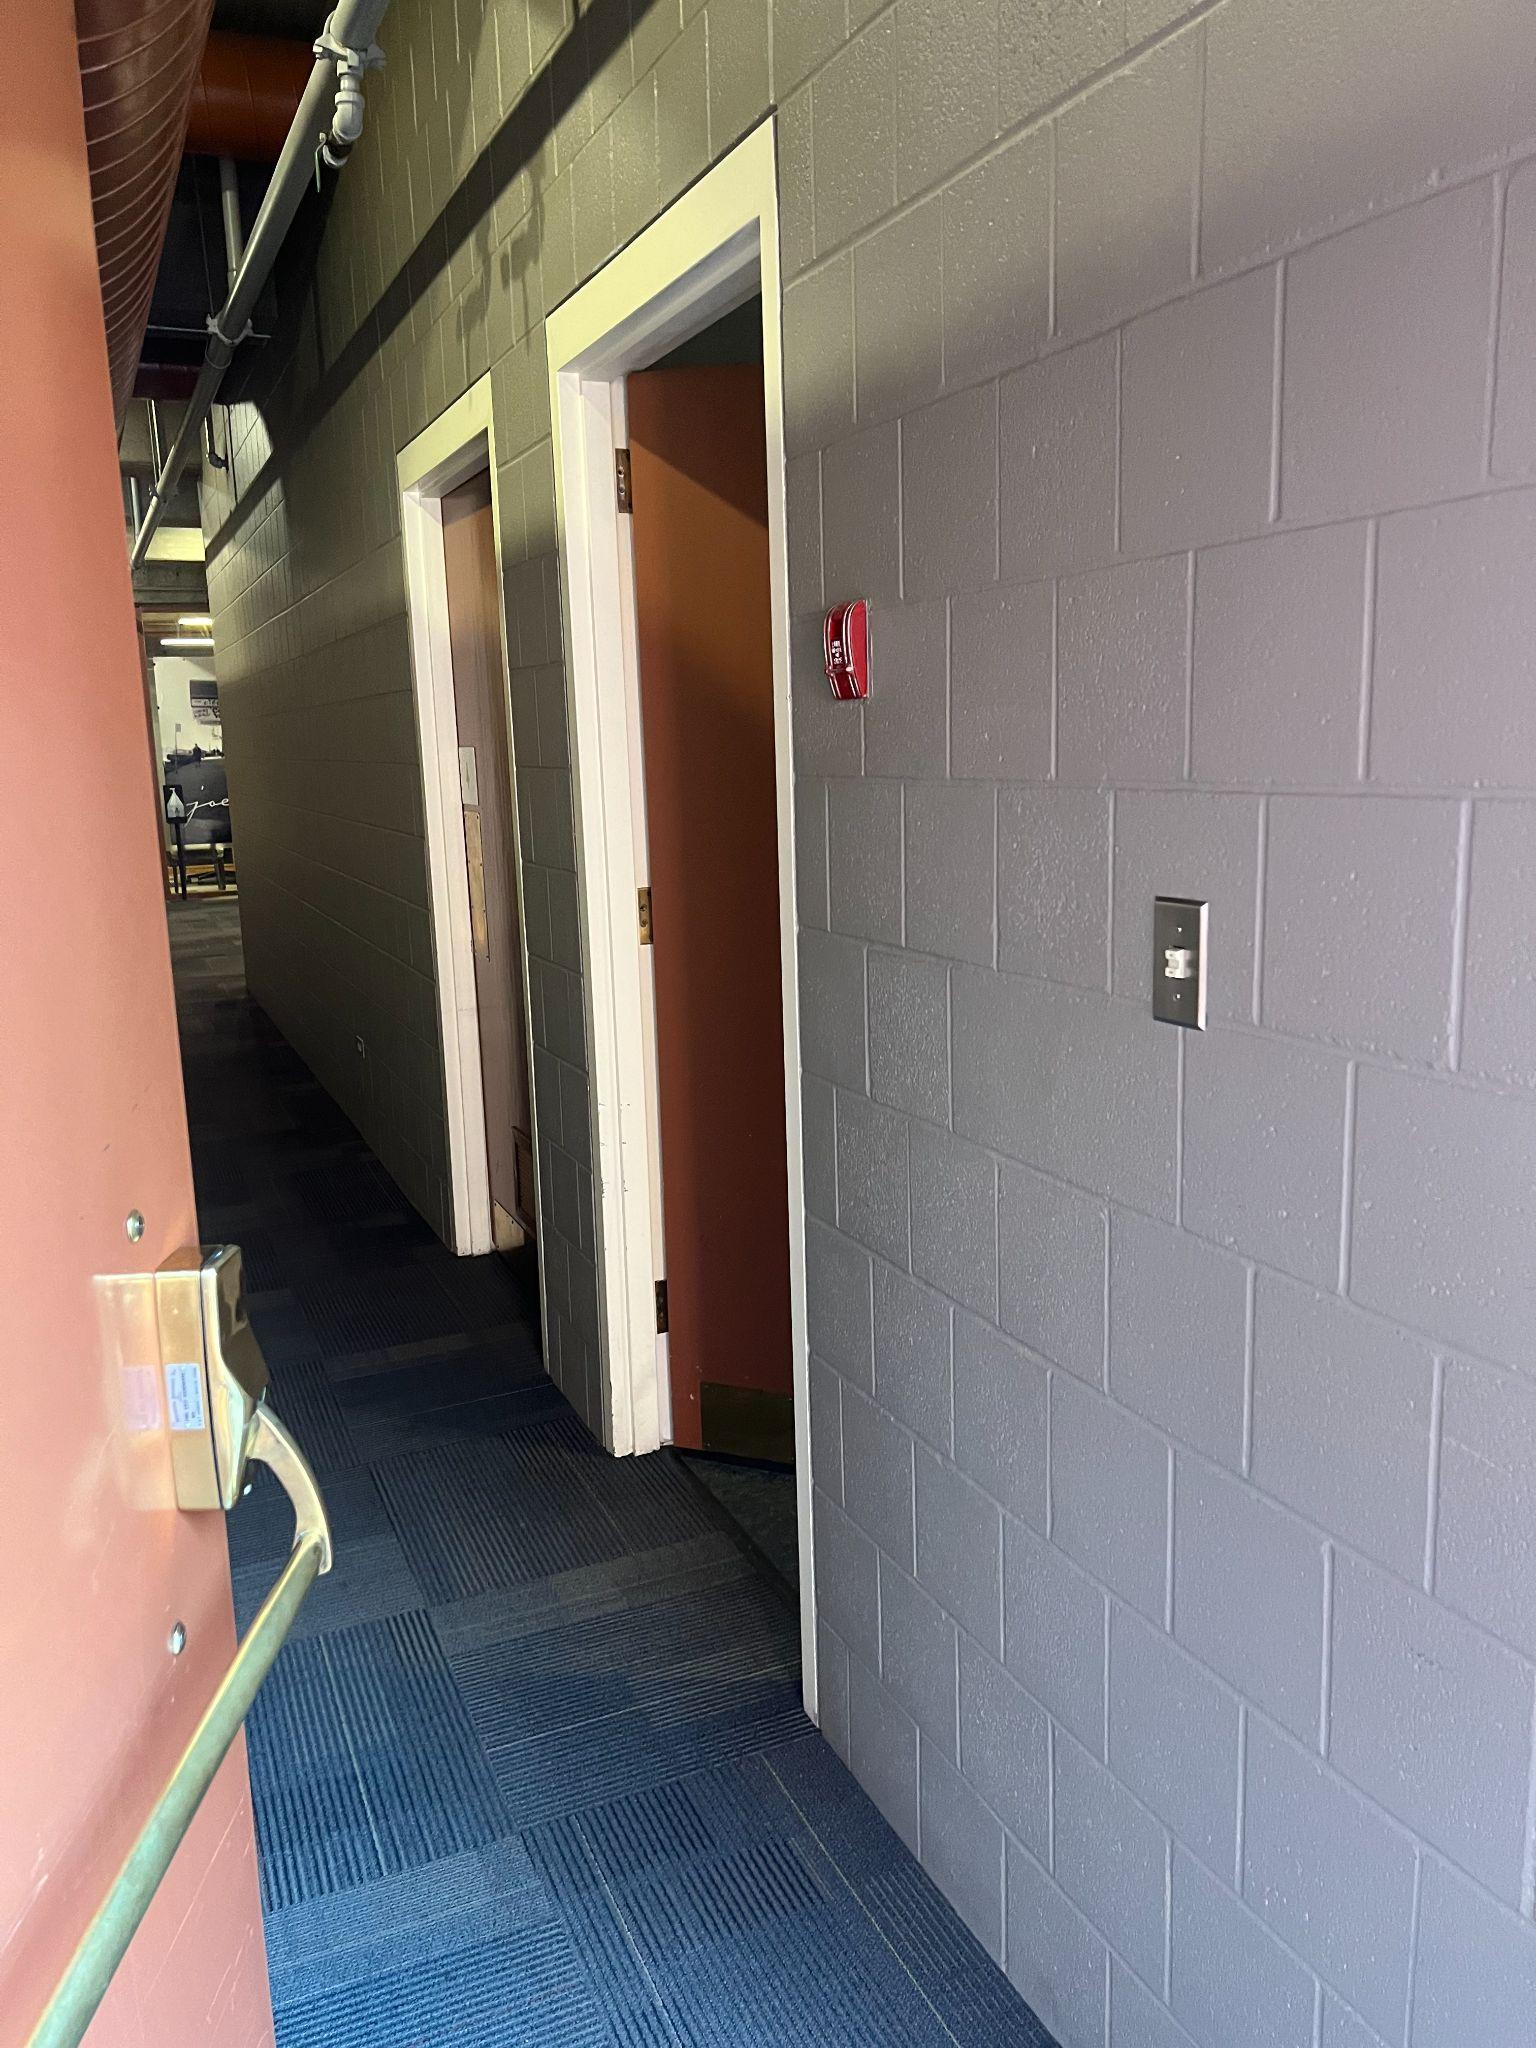 View as the crash door opens into the Administration area where an accessible washroom is located to the immediate right.